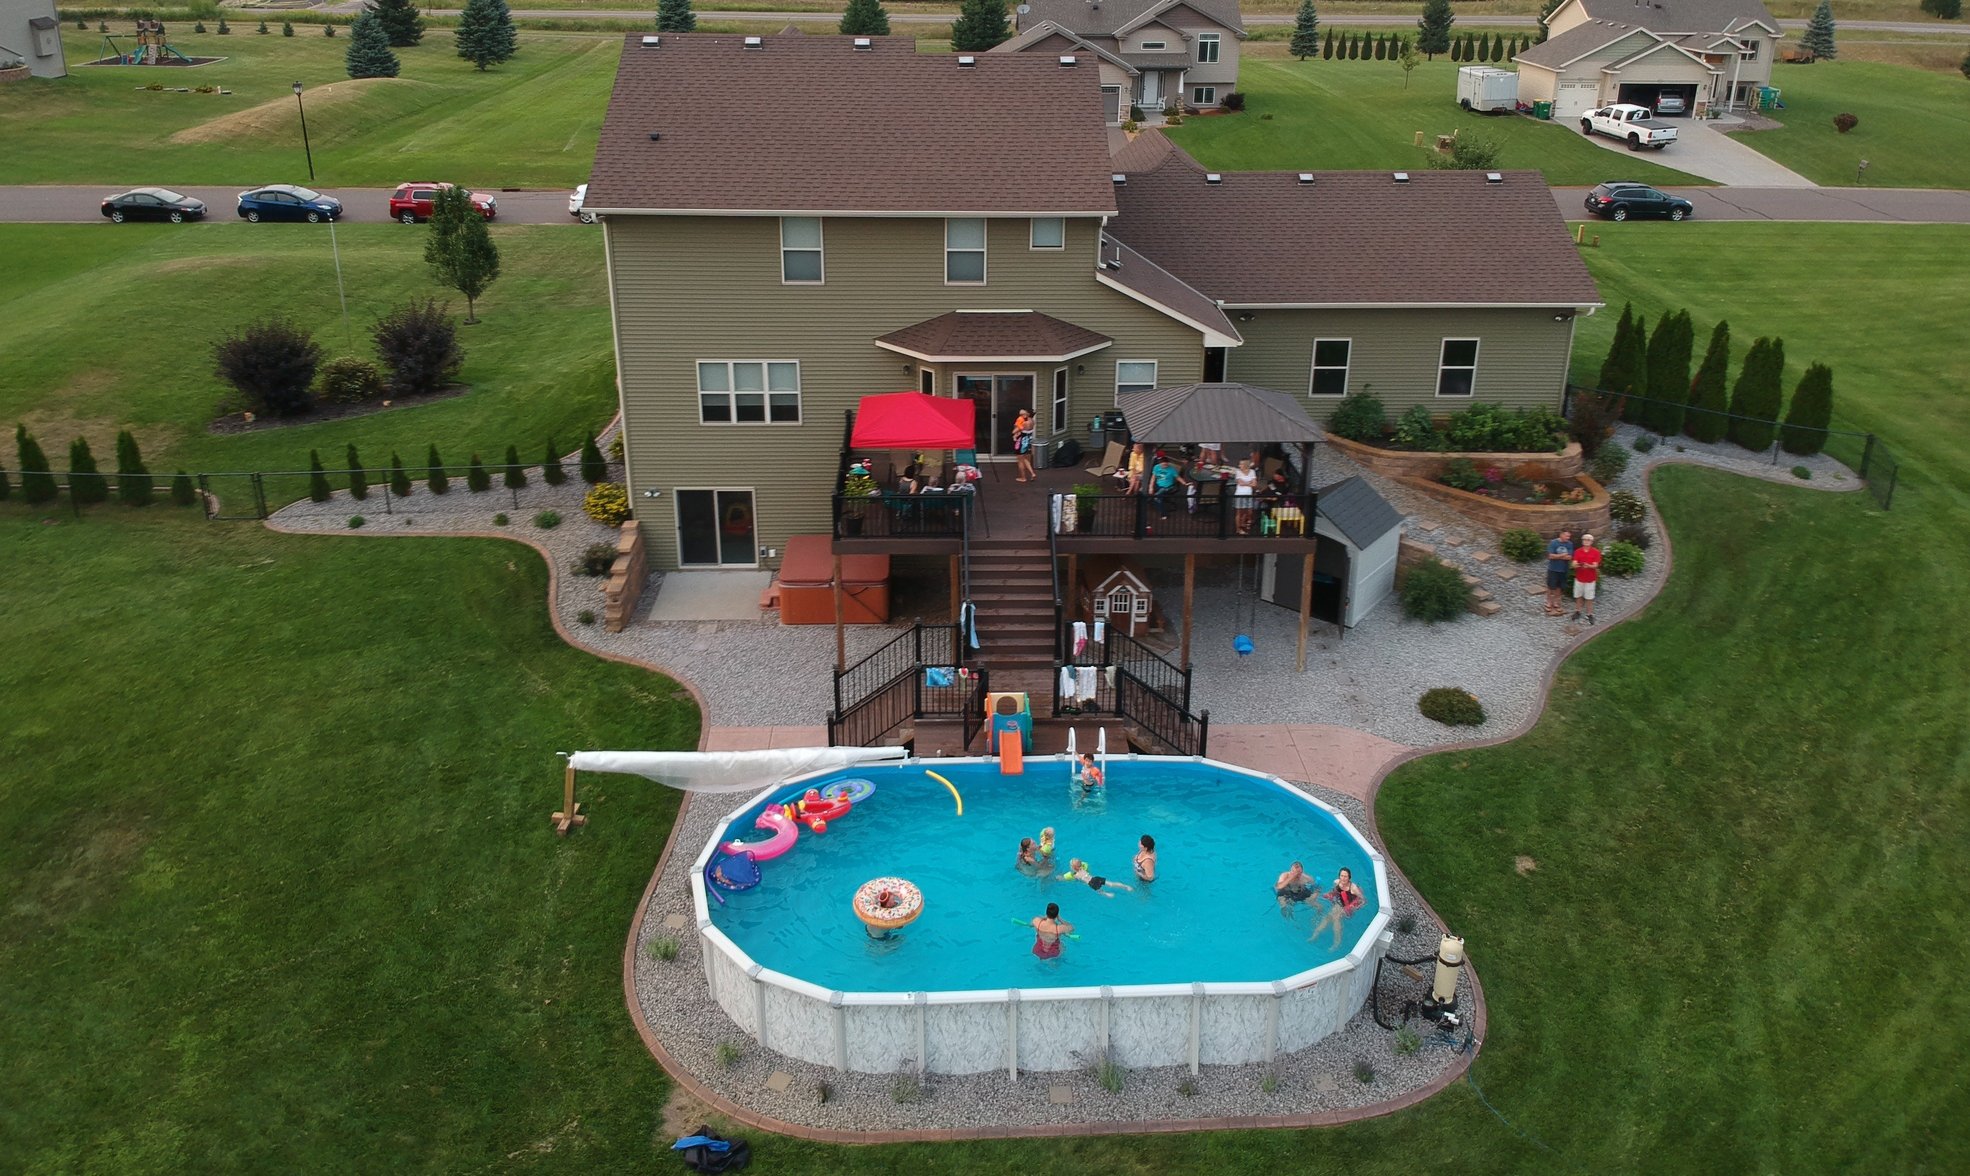 How Much Does An Above Ground Pool Cost To Build